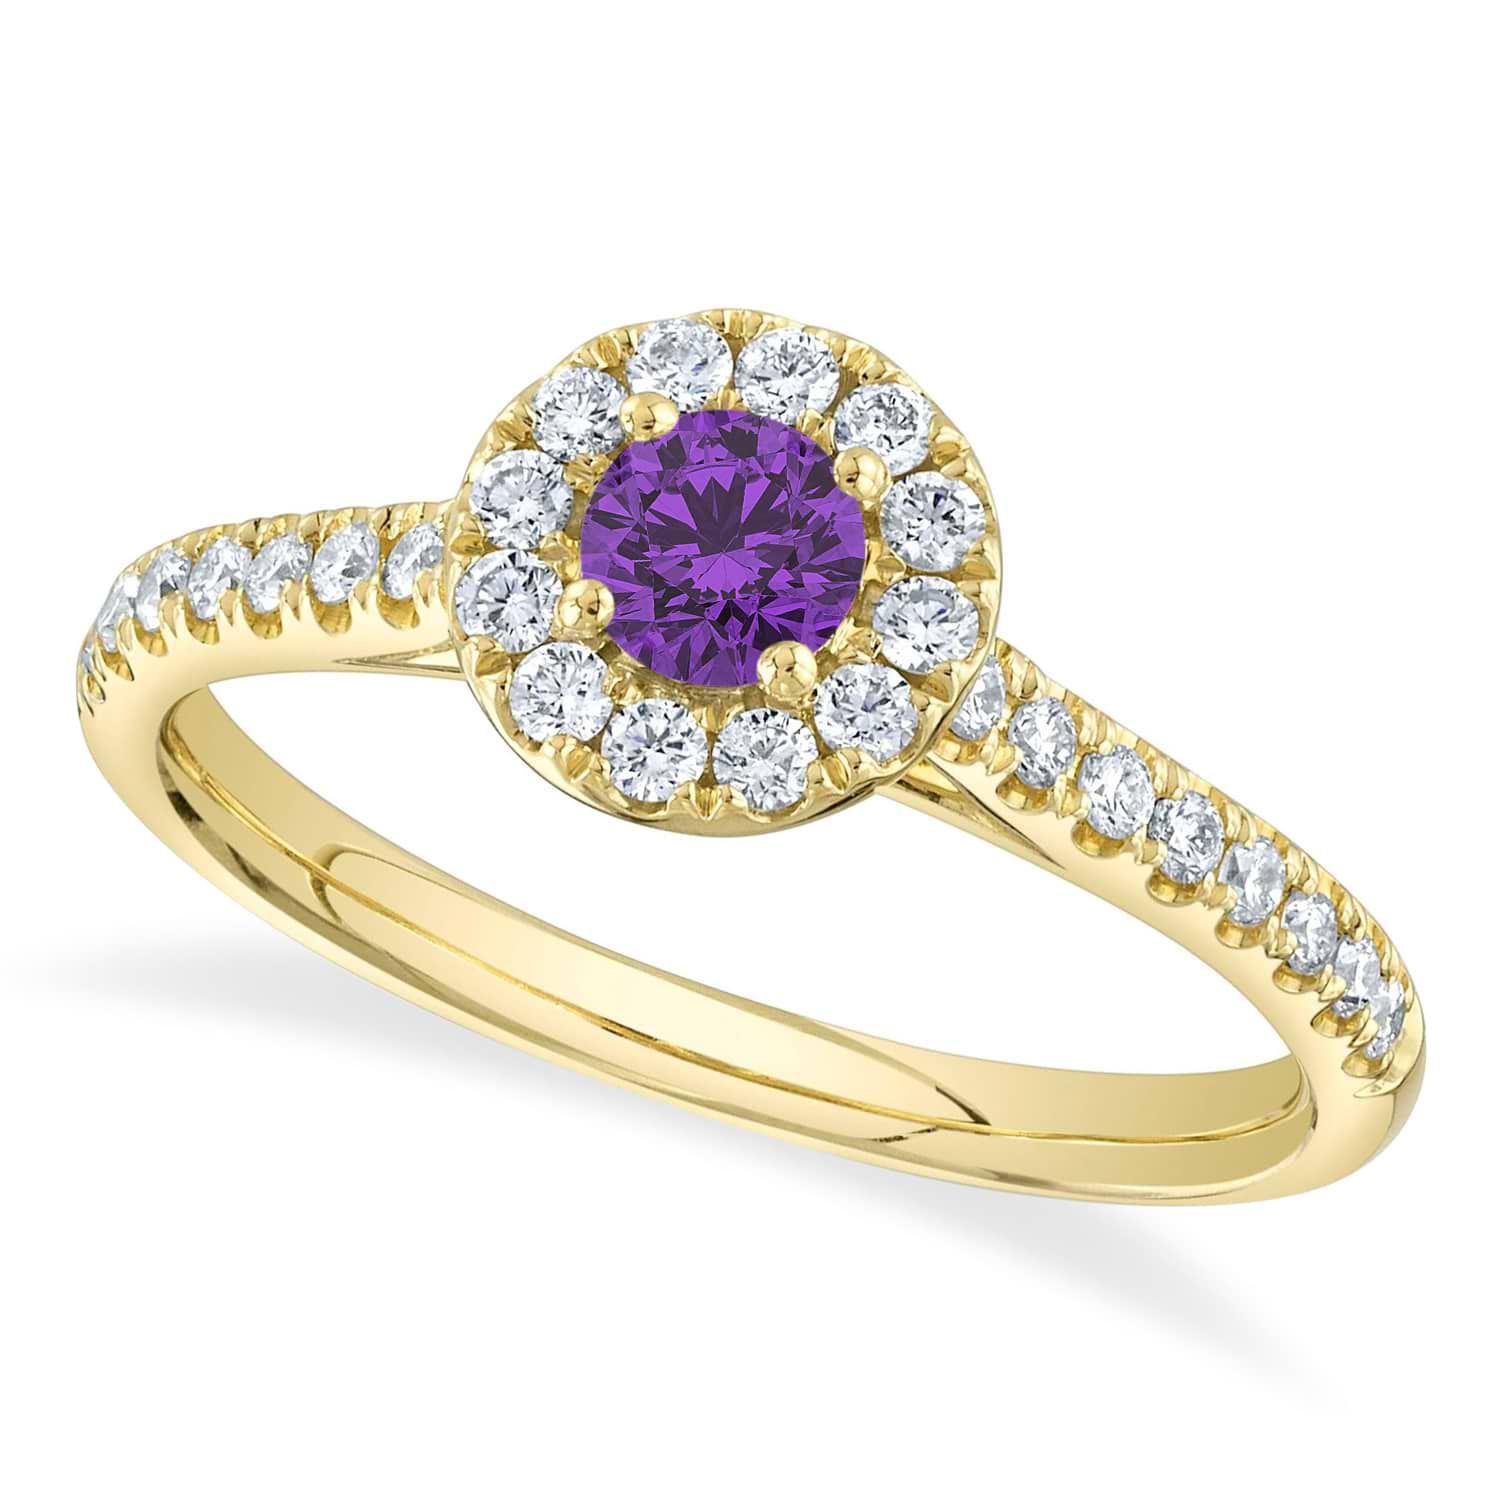 Round Amethyst Solitaire & Diamond Engagement Ring 14K Yellow Gold (0.56ct)